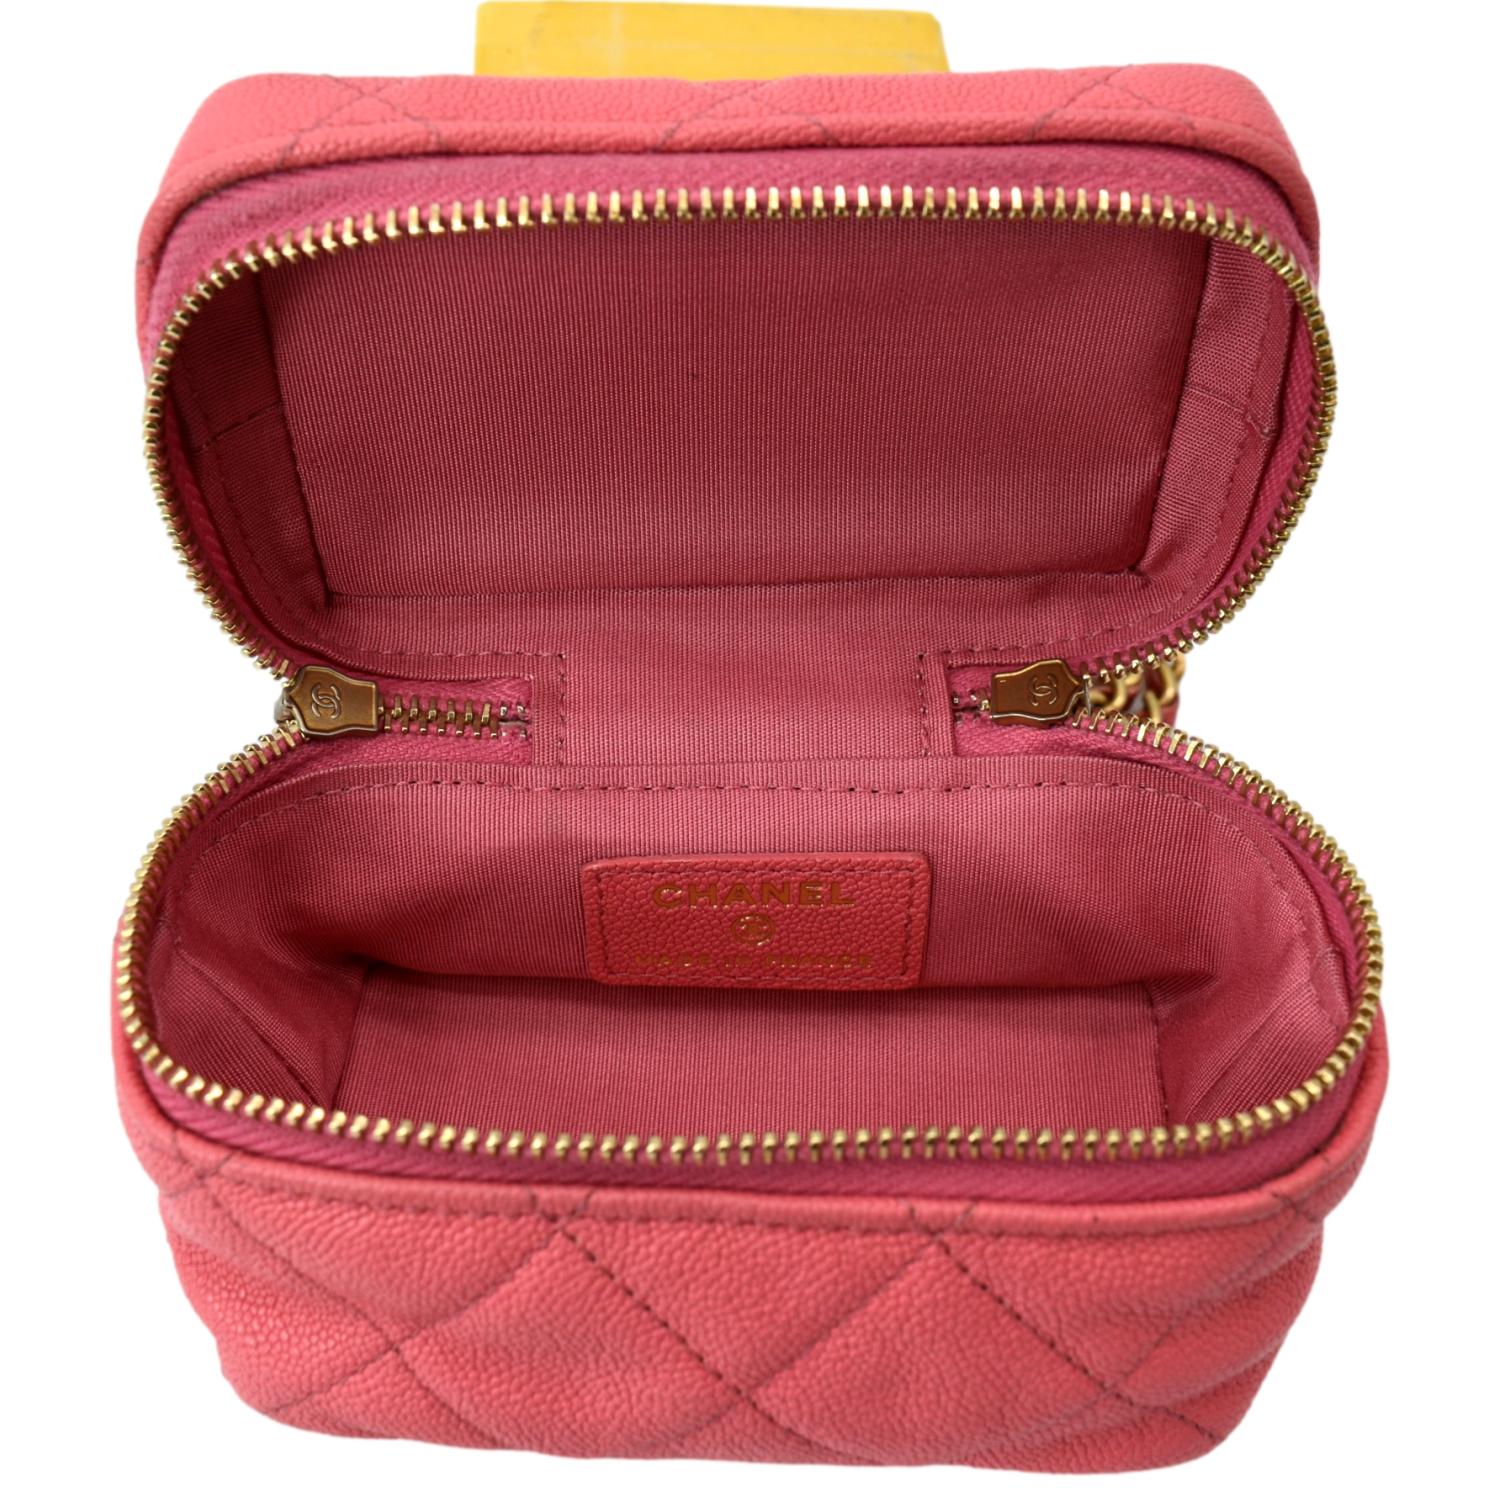 Chanel Pre-owned 2004-2005 Leather Cosmetic Case - Pink